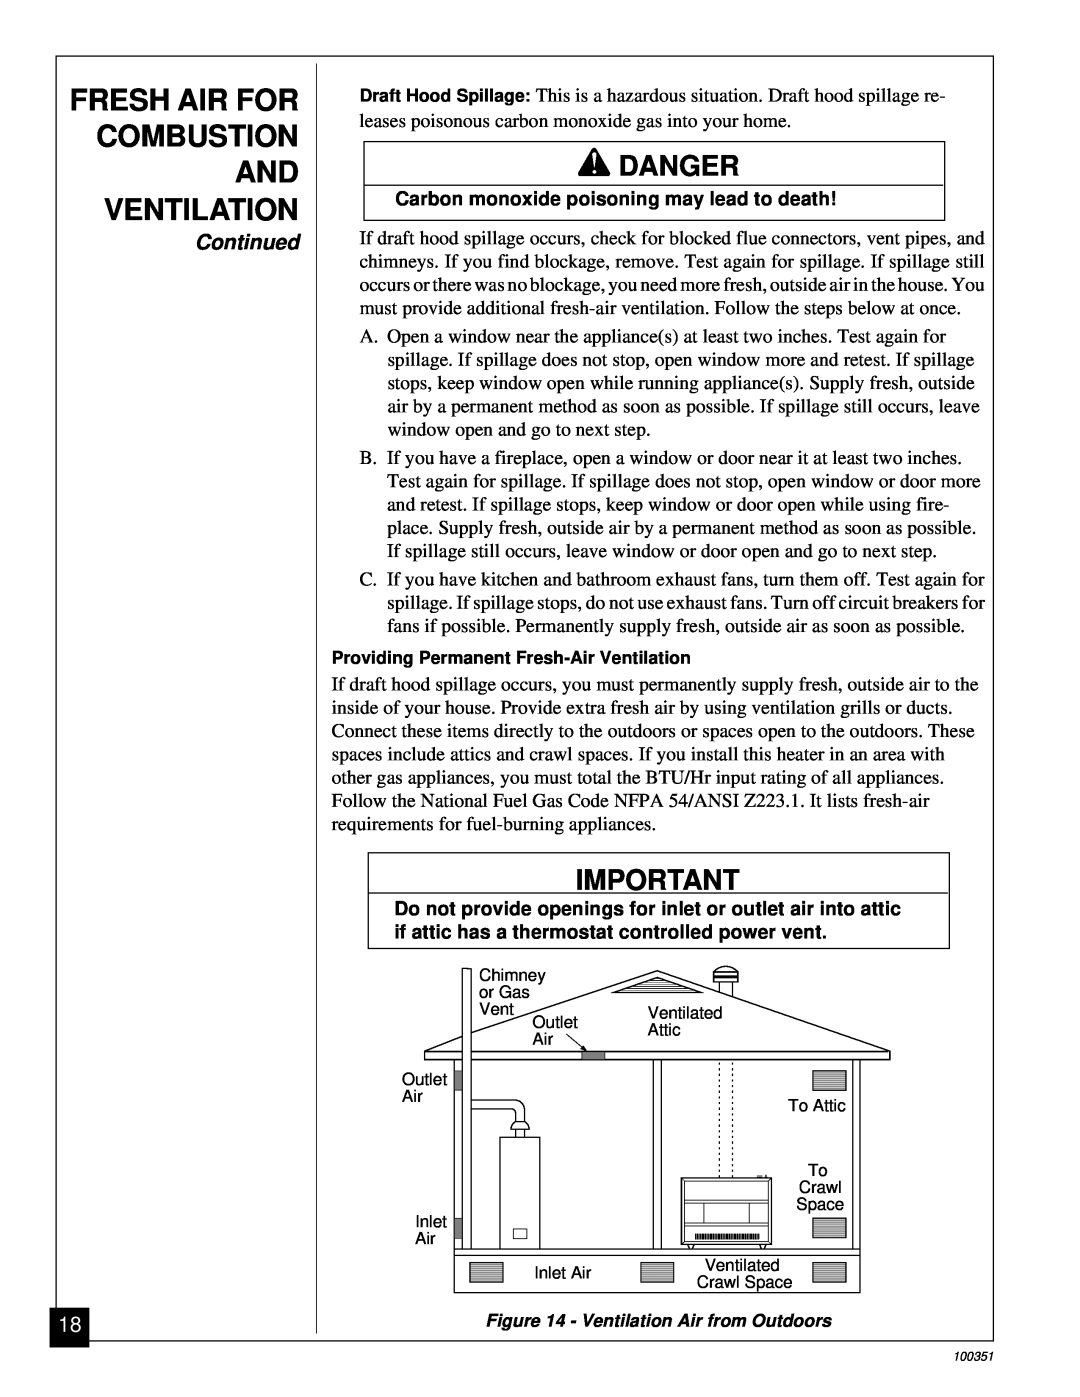 Desa CGB35N Fresh Air For Combustion And Ventilation, Danger, Continued, Carbon monoxide poisoning may lead to death 